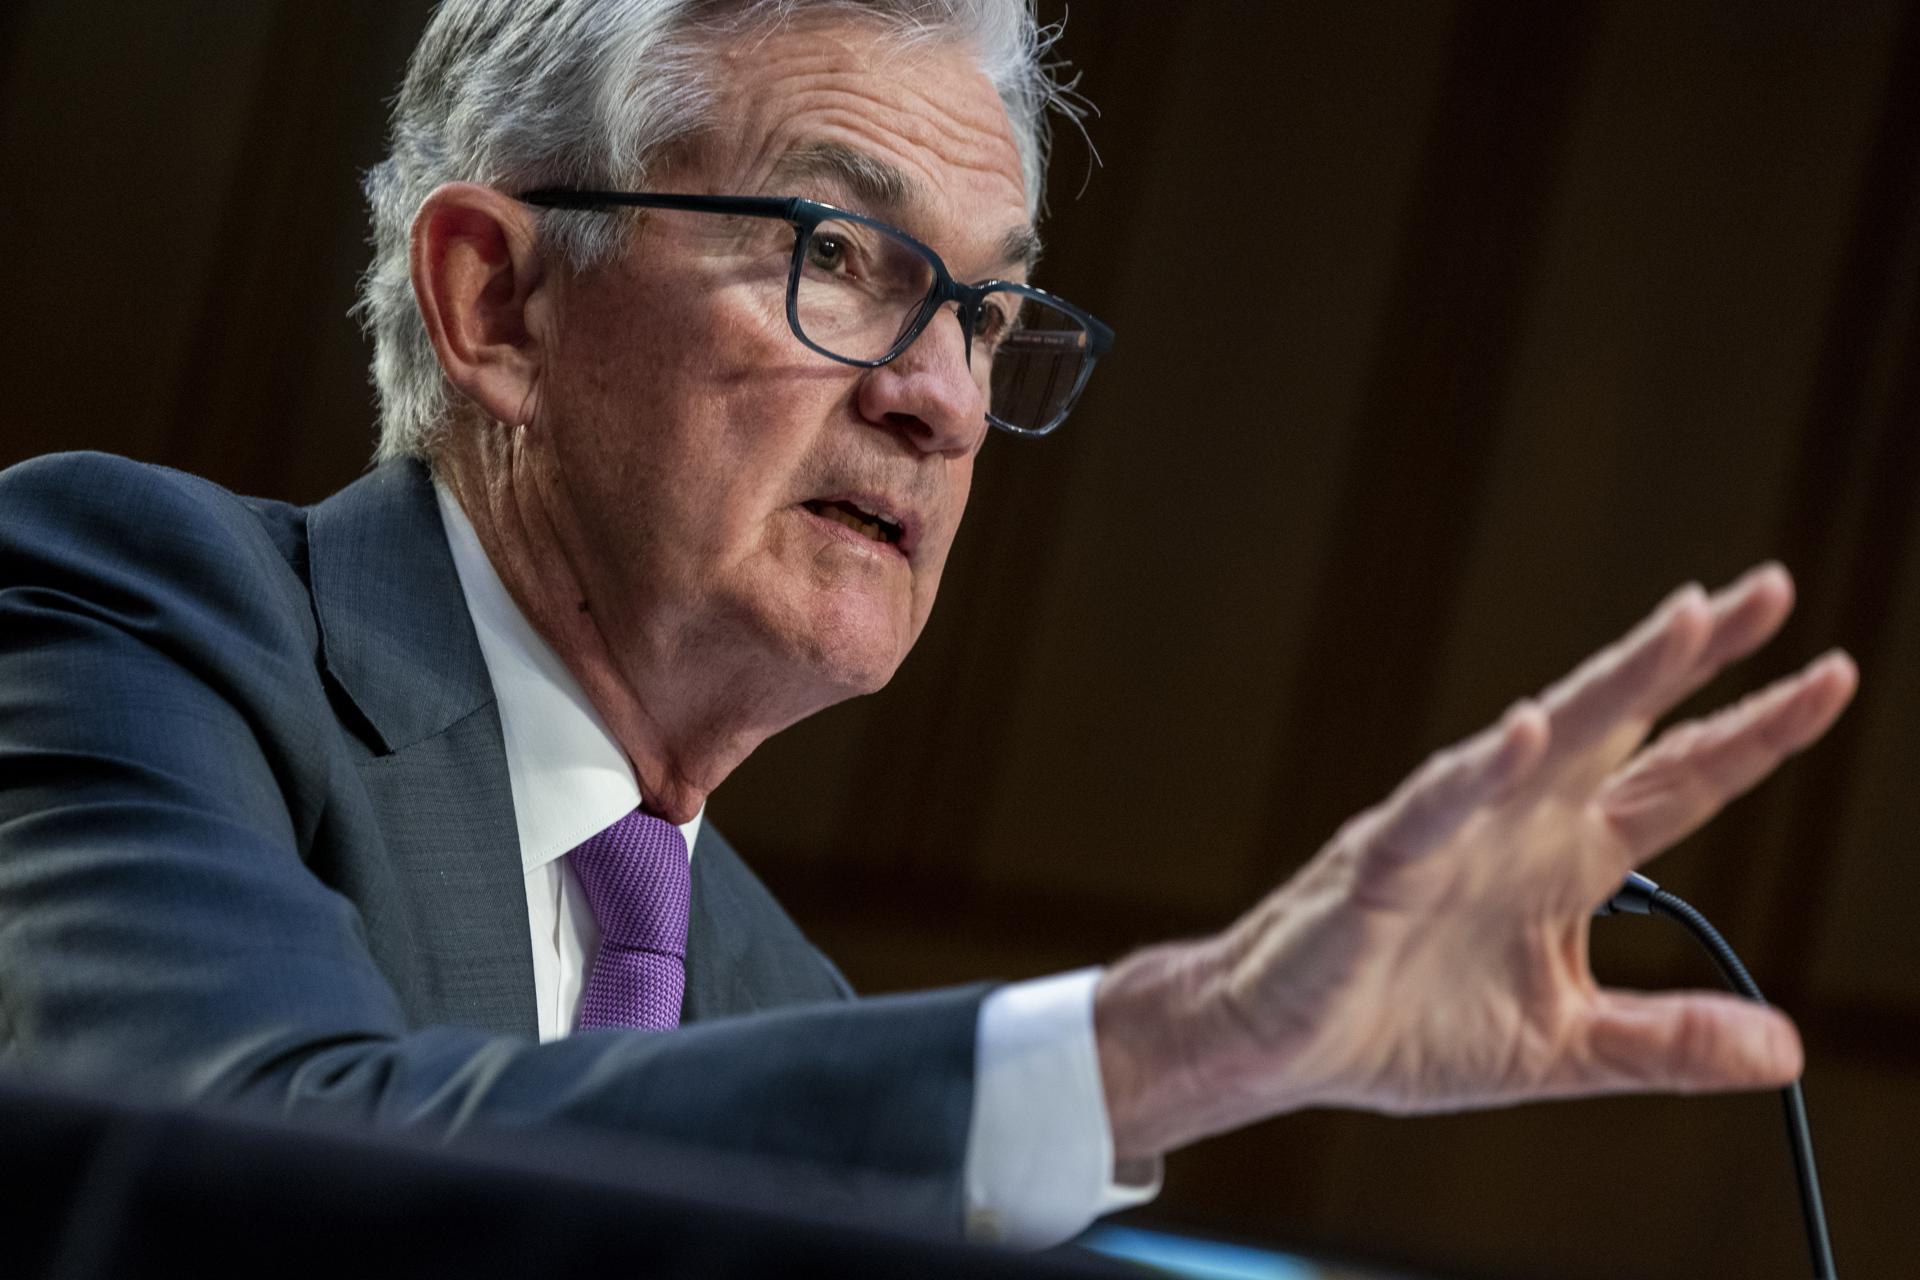 Federal Reserve Chairman Jerome Powell told Congress on 7 March 2023 that the US central bank remains laser-focused on reining in inflation and is ready to reverse course and accelerate the pace of interest rate hikes if necessary. EFE/Shawn Thew